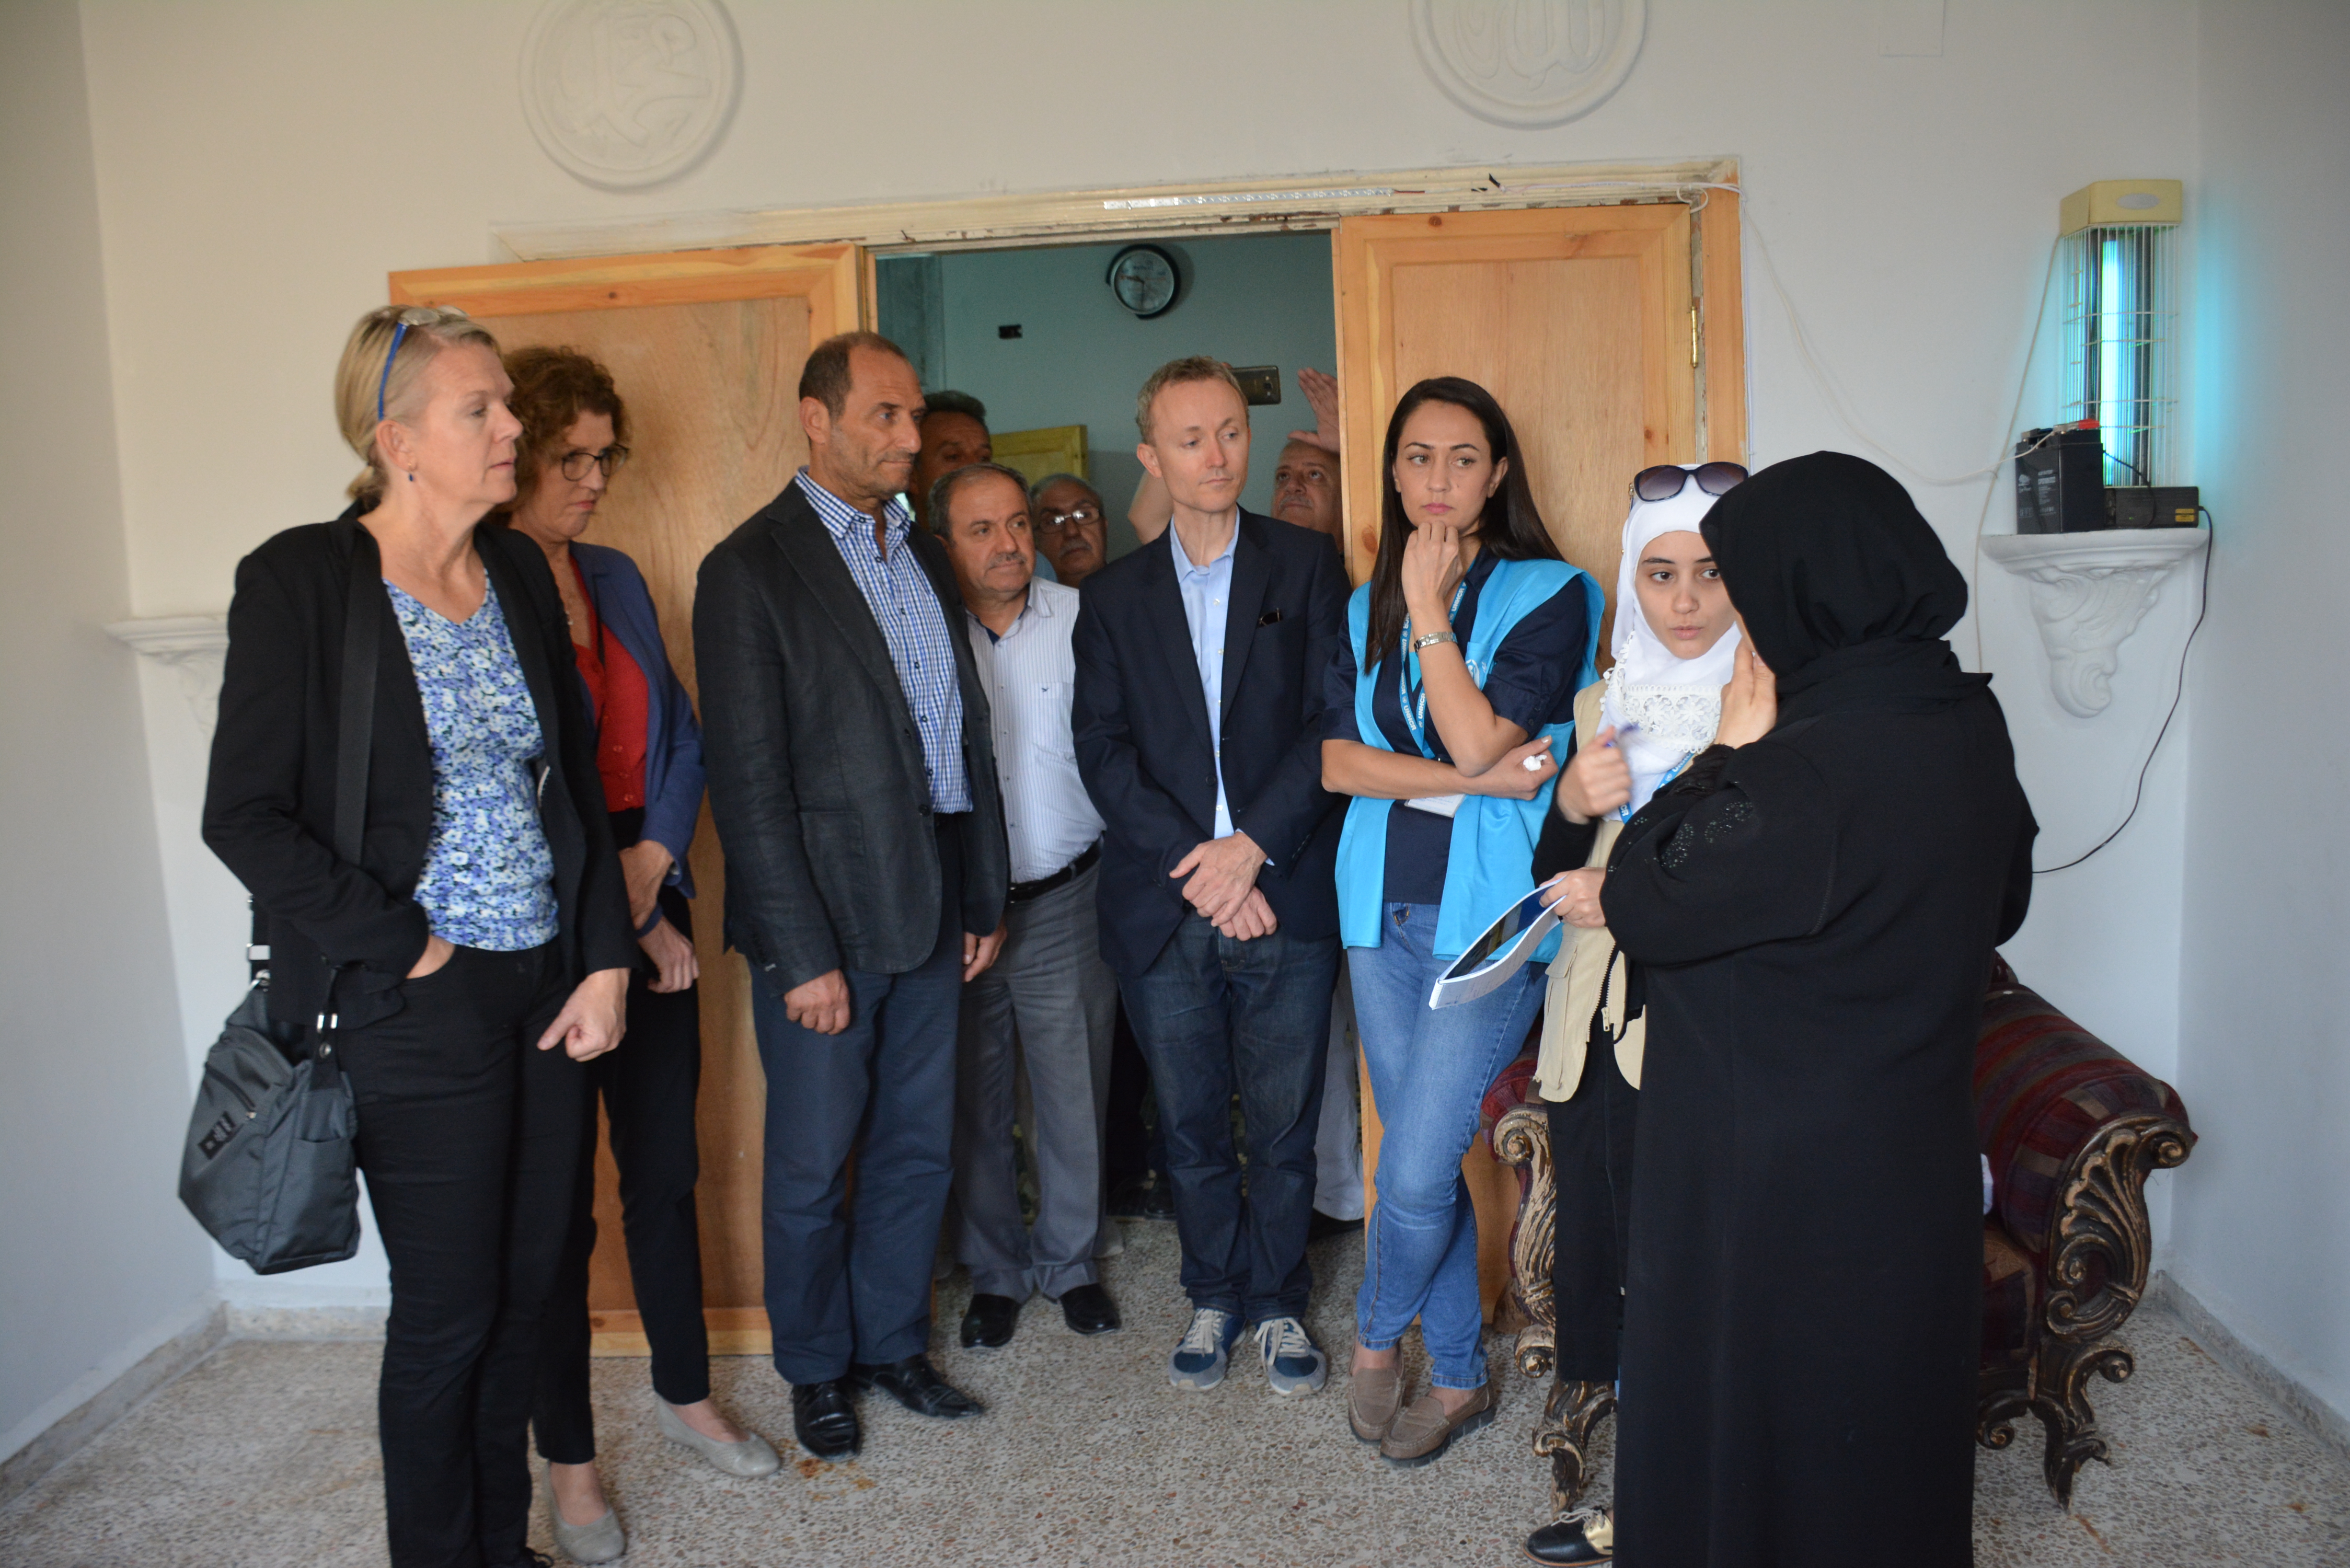 Norwegian delegation meets displaced Syrians in Homs city